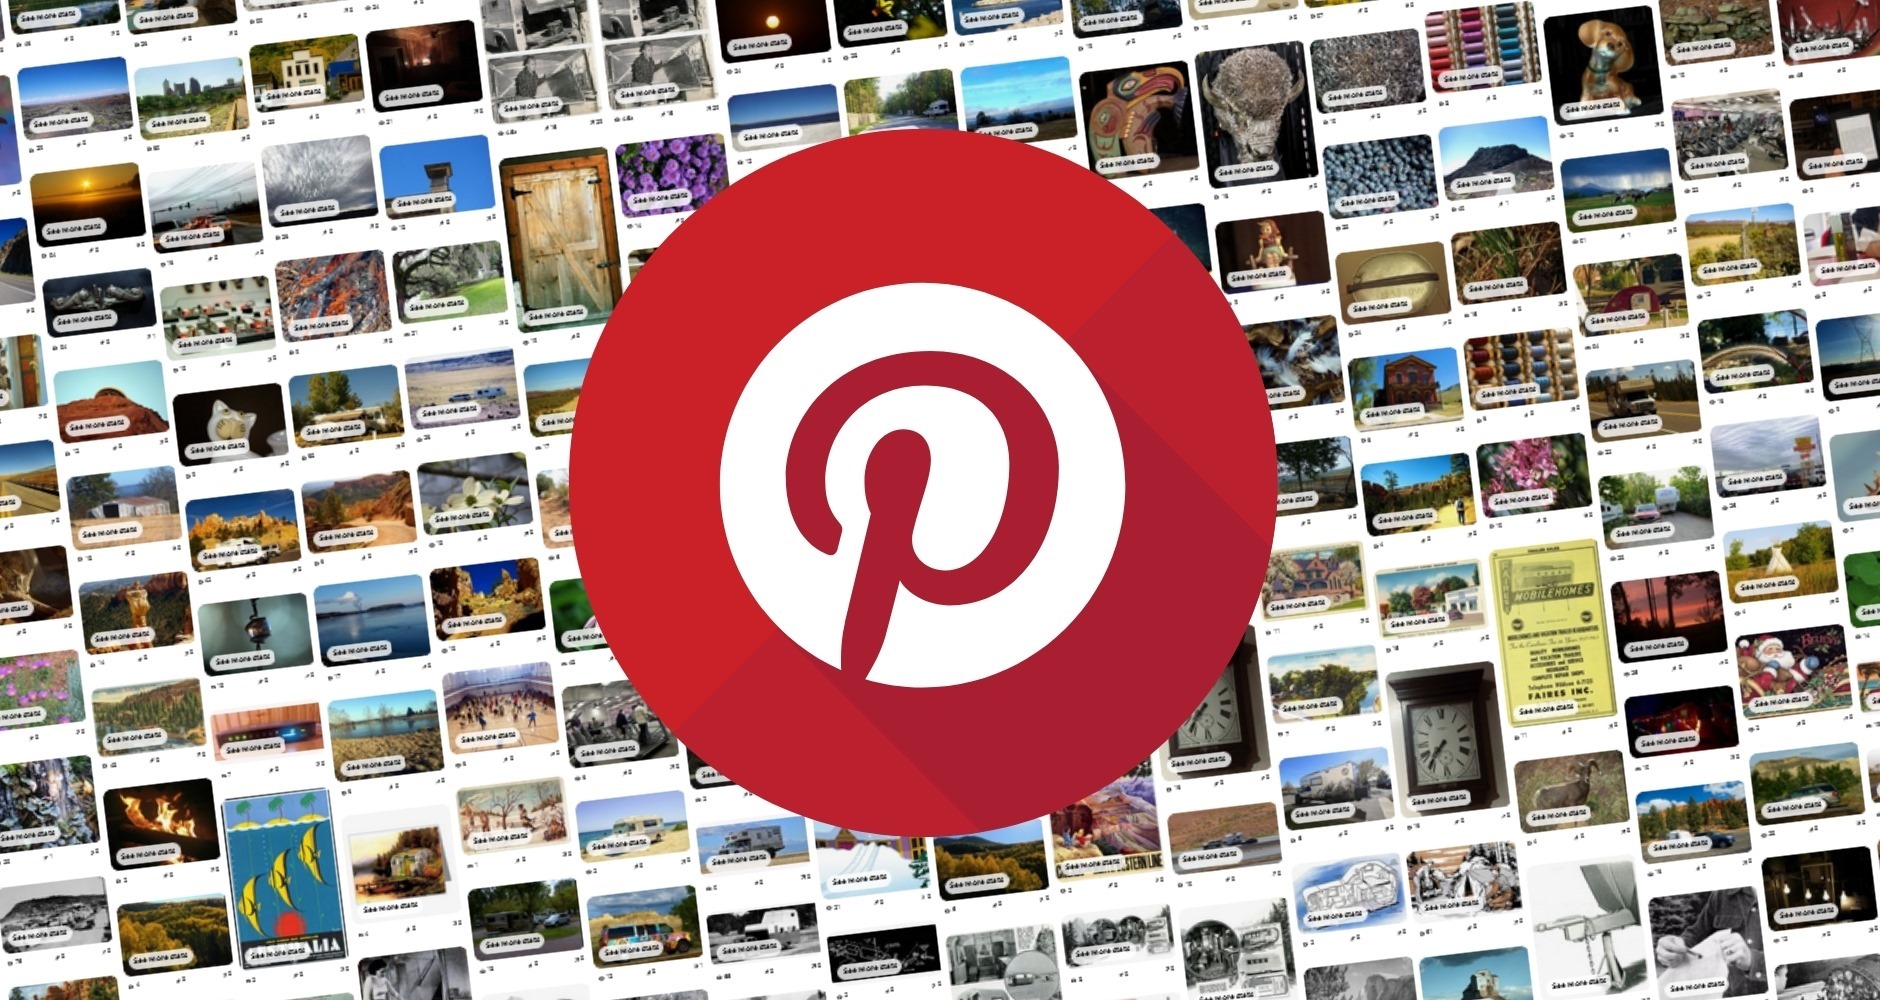 Pin, pins, and more pins. Pinterest is an American image sharing and social media service designed to enable saving and discovery of information (specifically "ideas") on the internet using images in the form of pinboards.